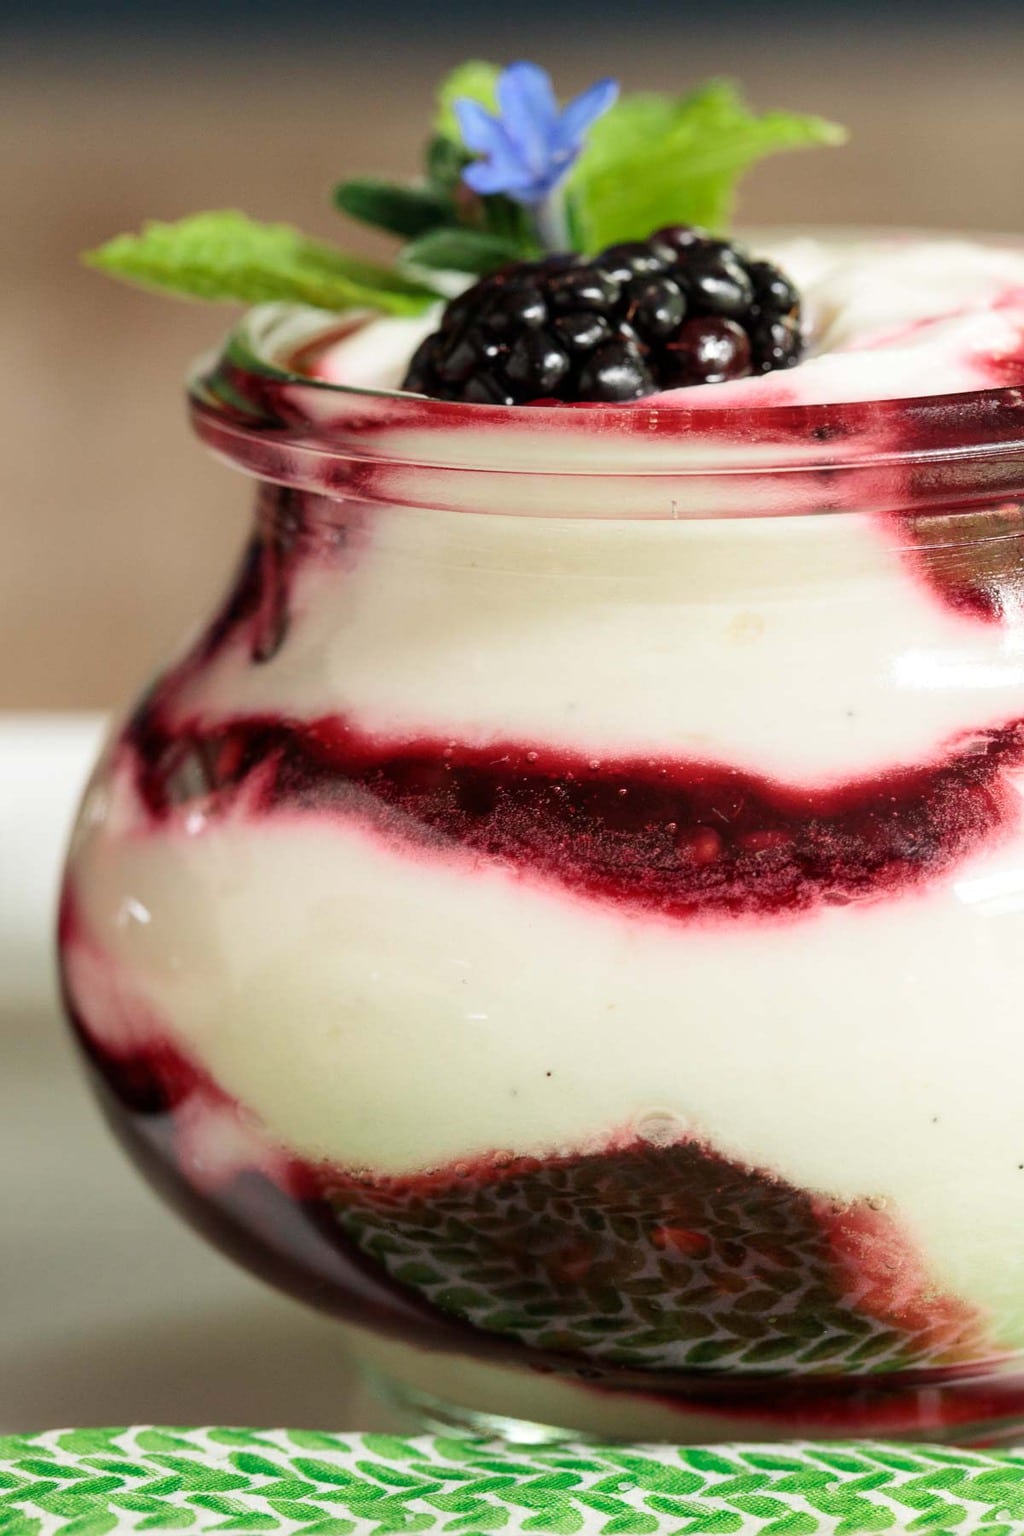 Closeup photo of an Irish Blackberry Fool in a clear glass Weck jar garnished with mint and wildflowers.